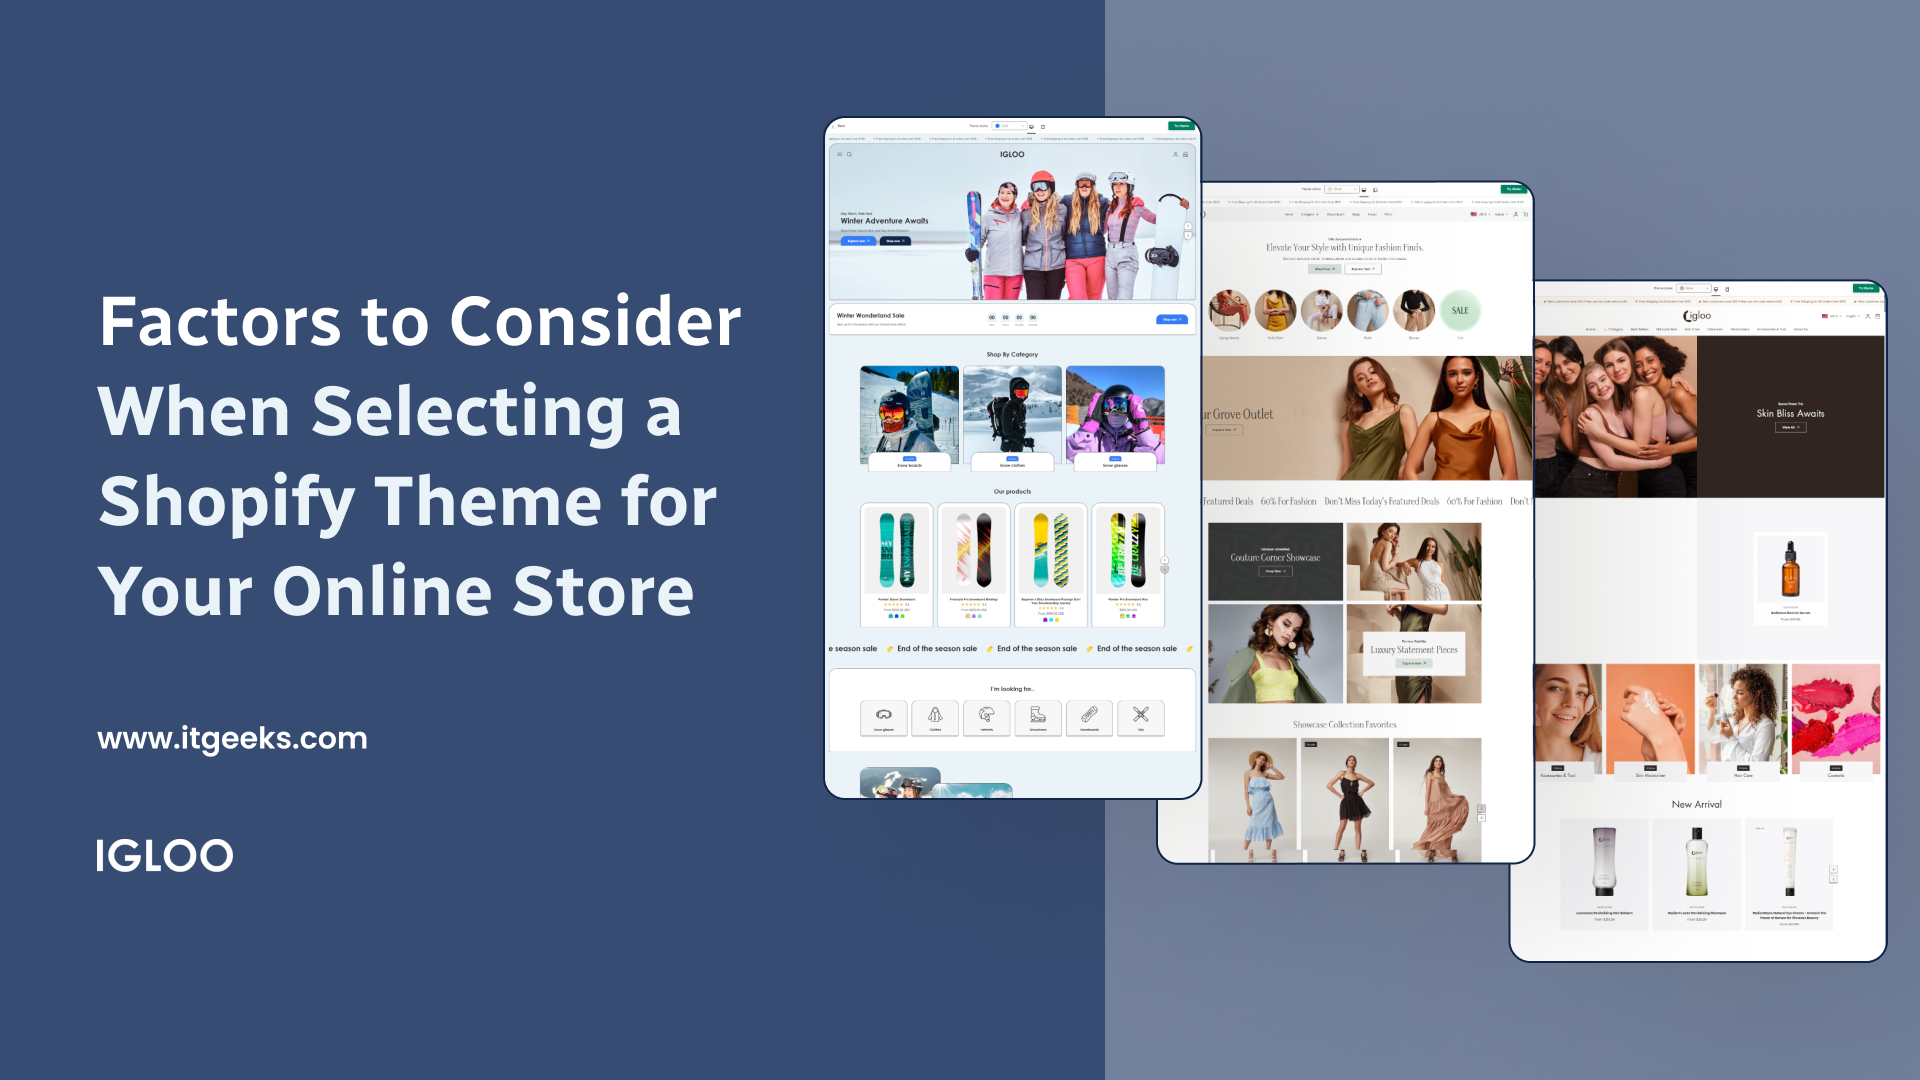 Factors to Consider When Selecting a Shopify Theme for Your Online Store